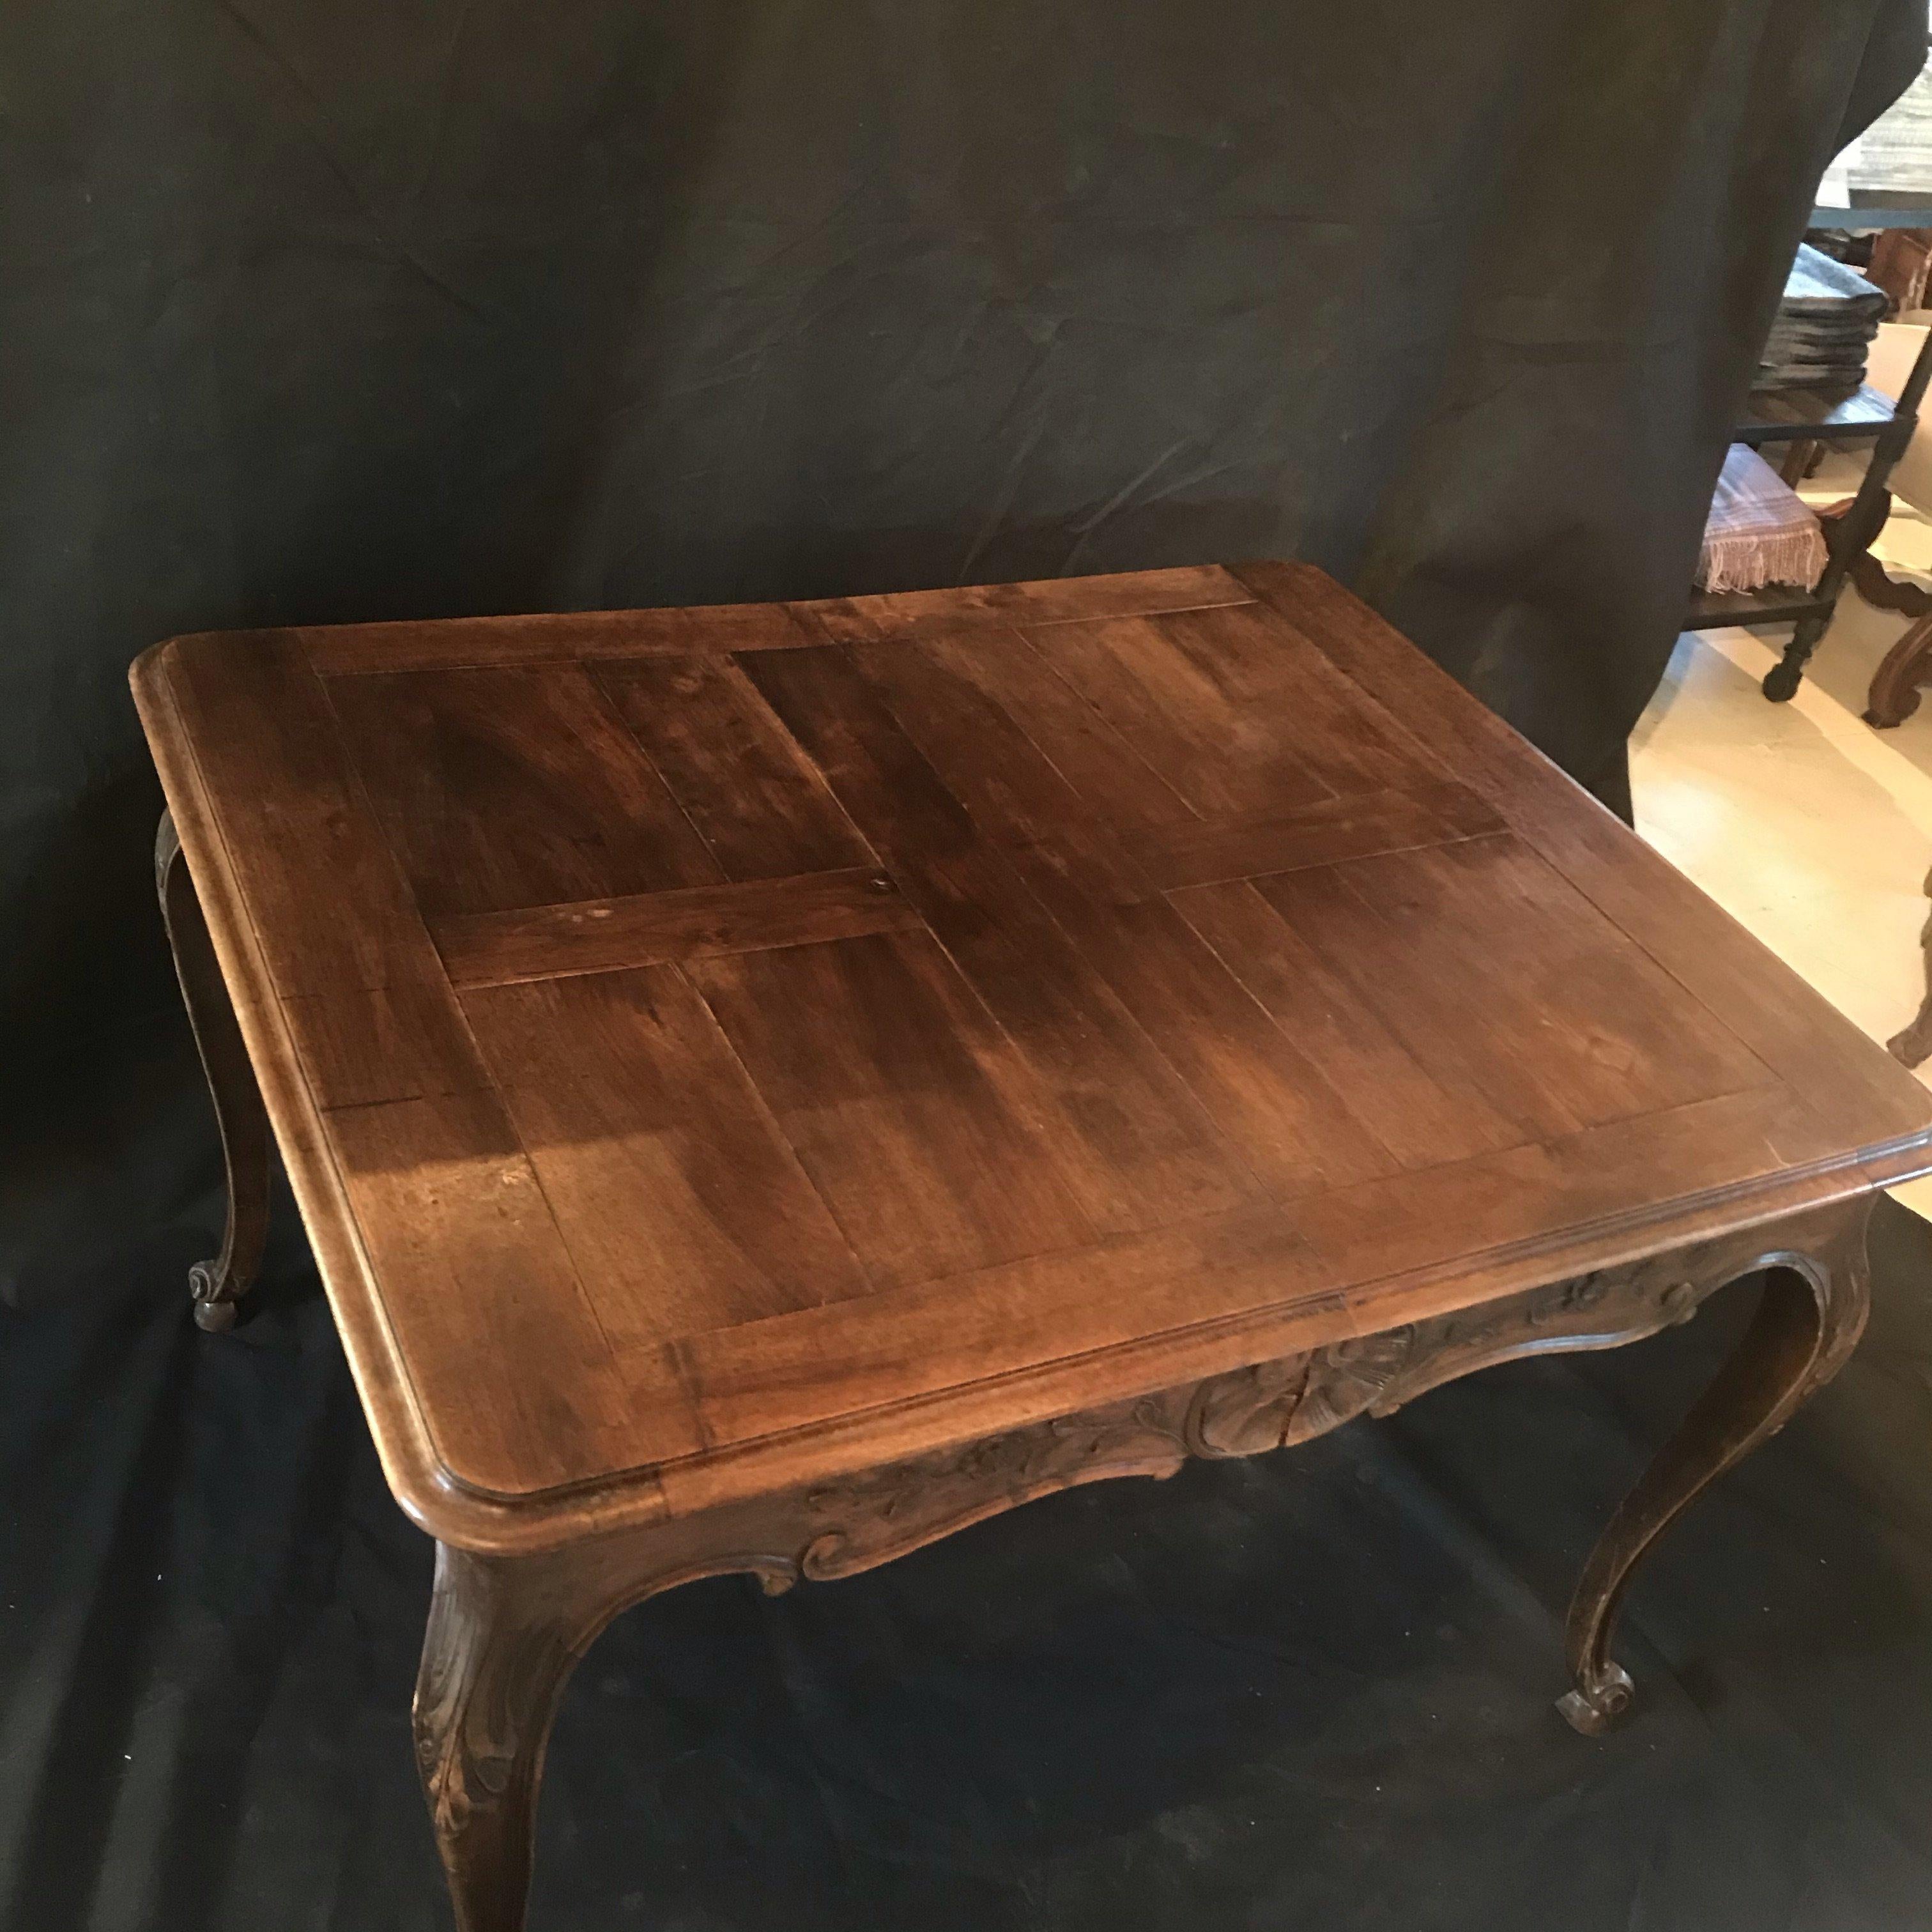 Beautiful 19th century country French Louis XV carved walnut dining table. Can also be used as a large desk or game table. Gorgeous banded parquet table top. No leaves included.
Measures: H skirt 22.5”
#1903.